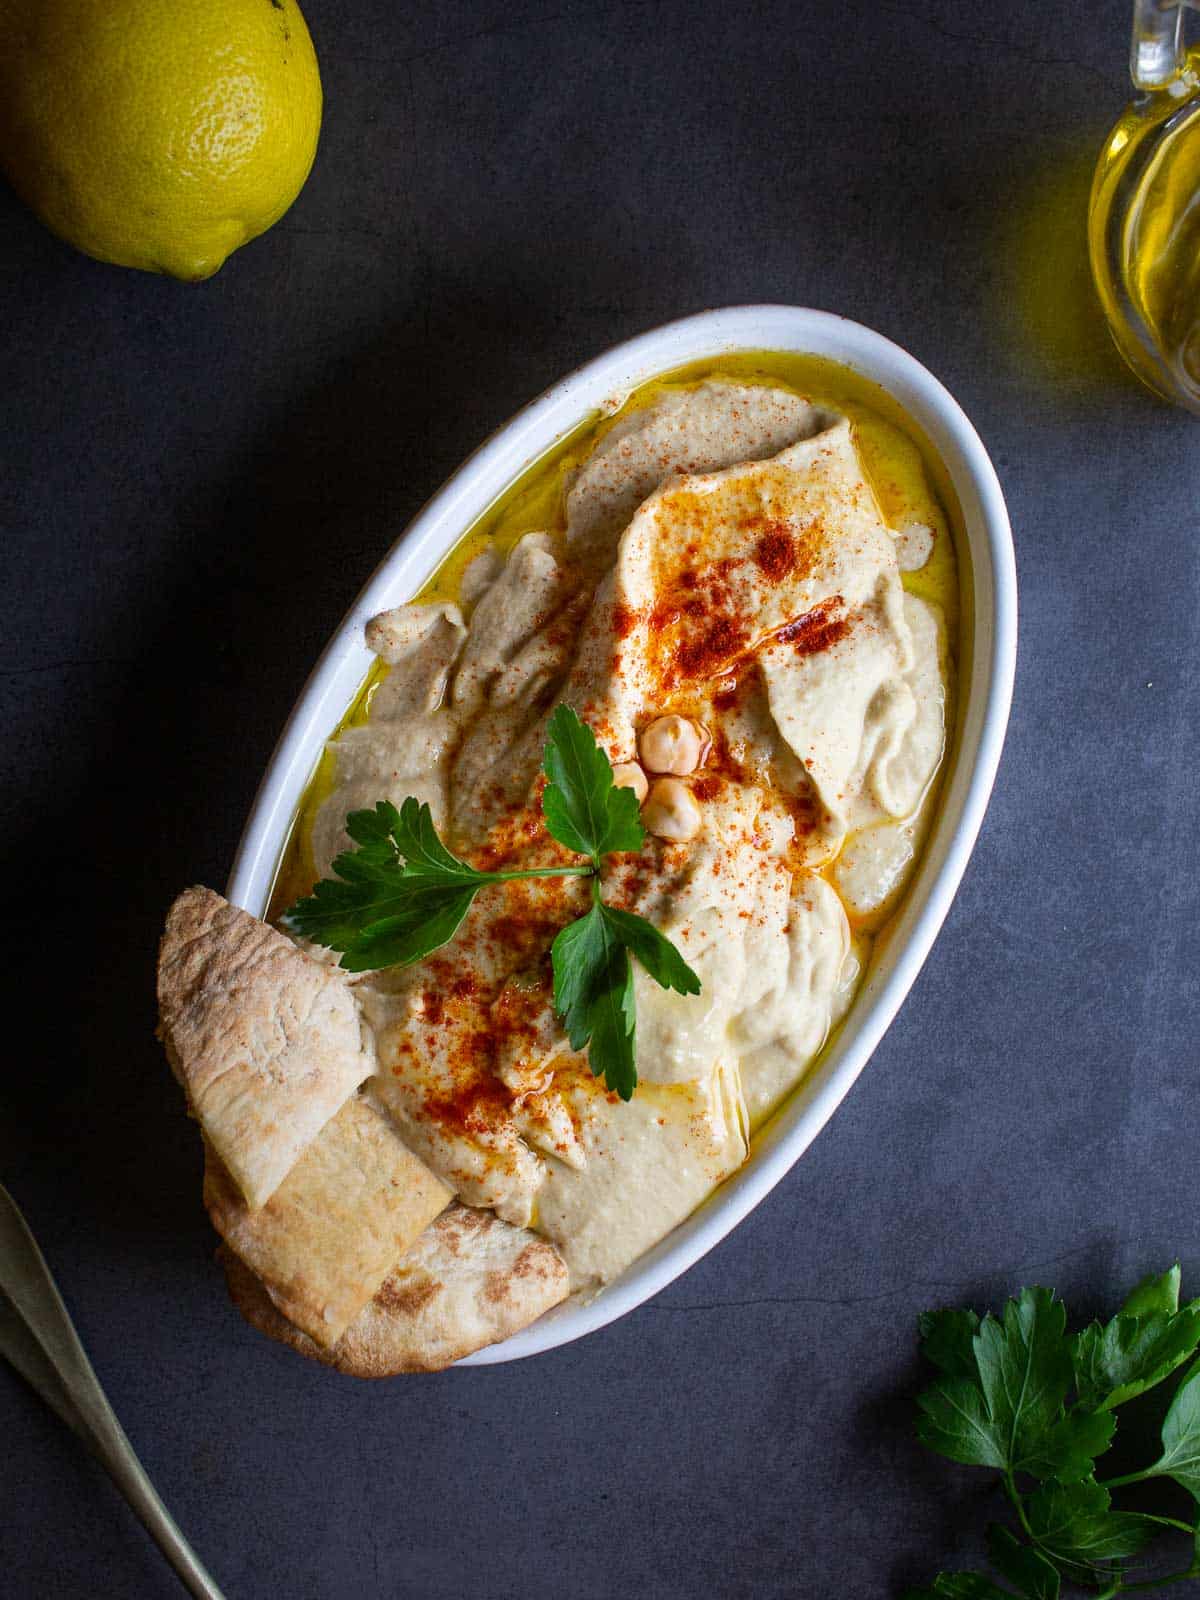 Hummus plated with pita bread and parsley.